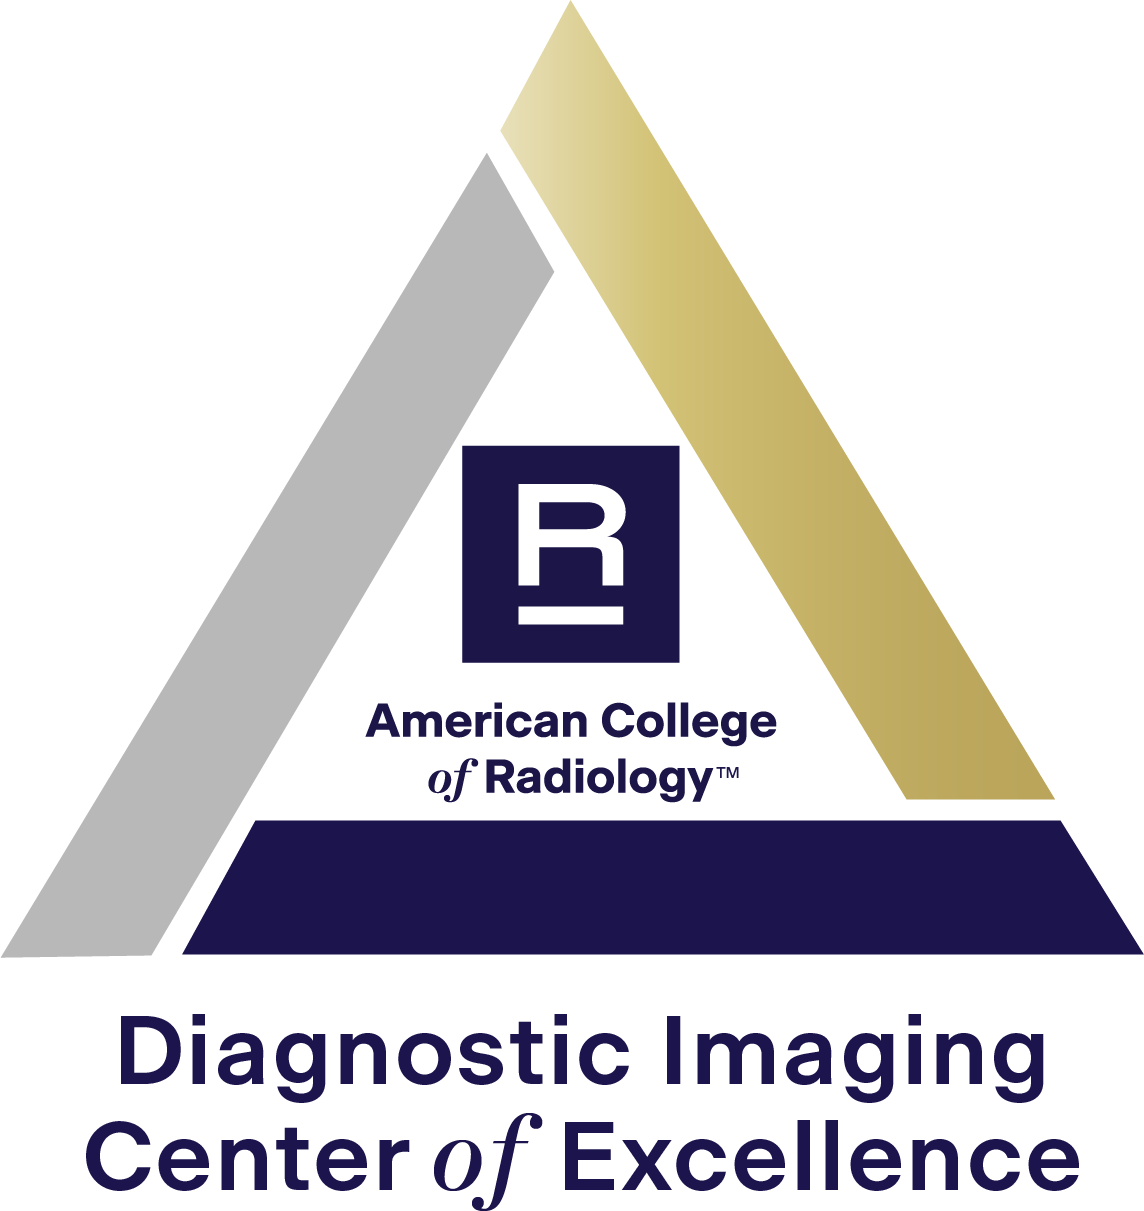 American College of Radiology Diagnostic Imaging Center of Excellence badge